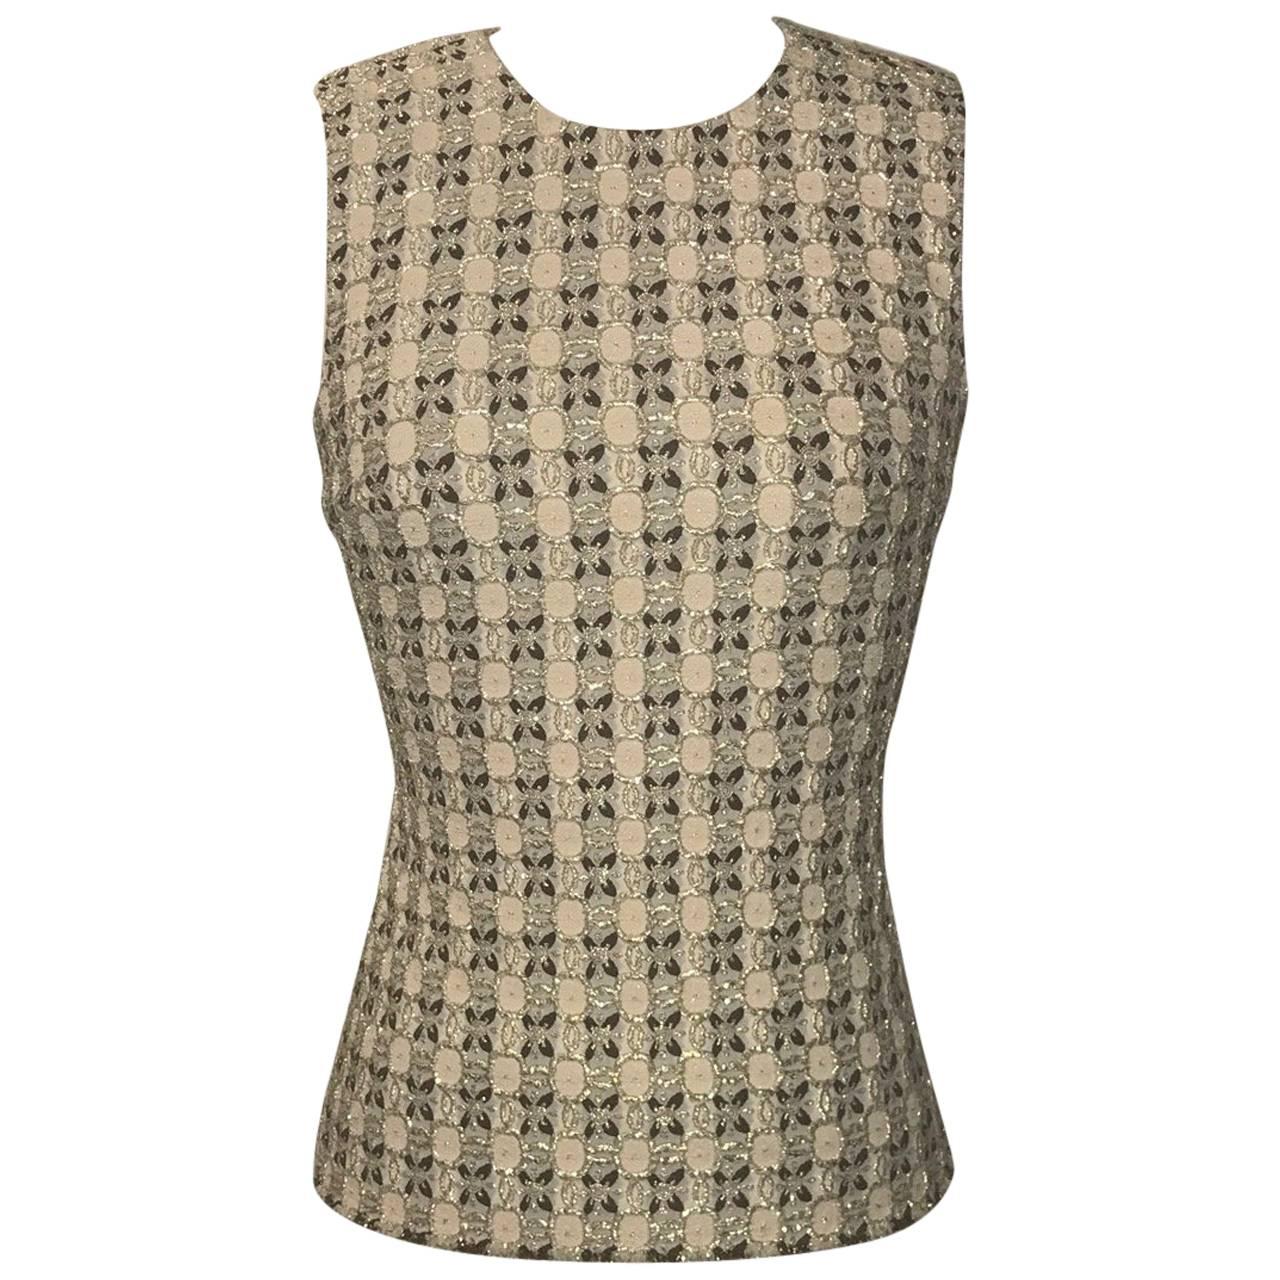 Prada Gold Beige and Pink Patterned Sleeveless Shell Top